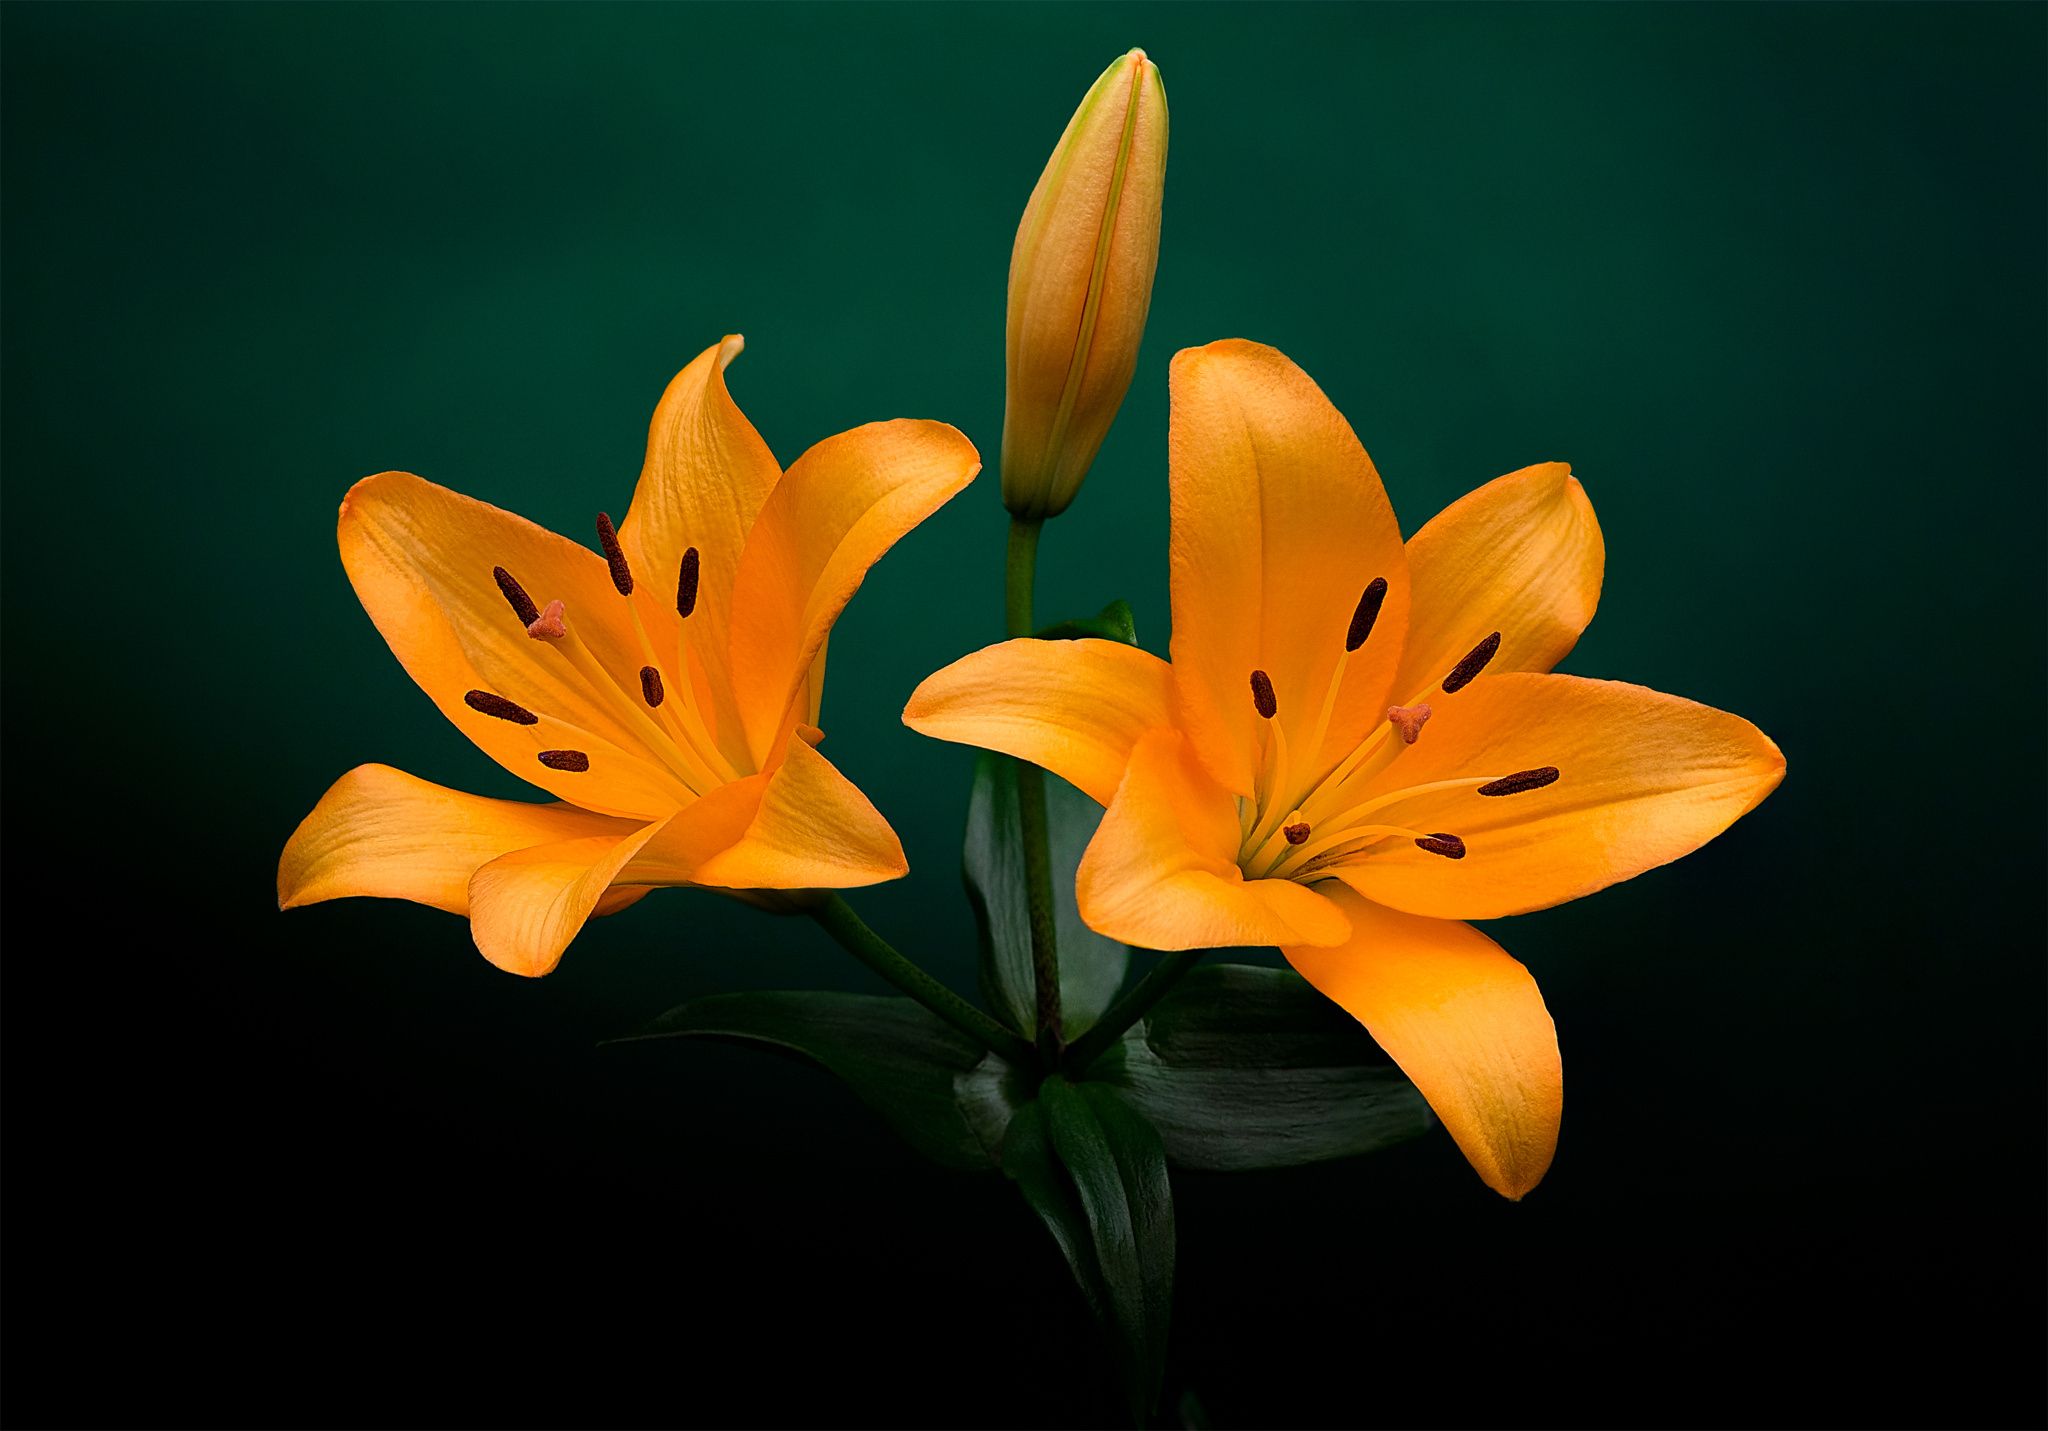 Lilium bulbiferum - The Orange Lily has long been recognised as a ...